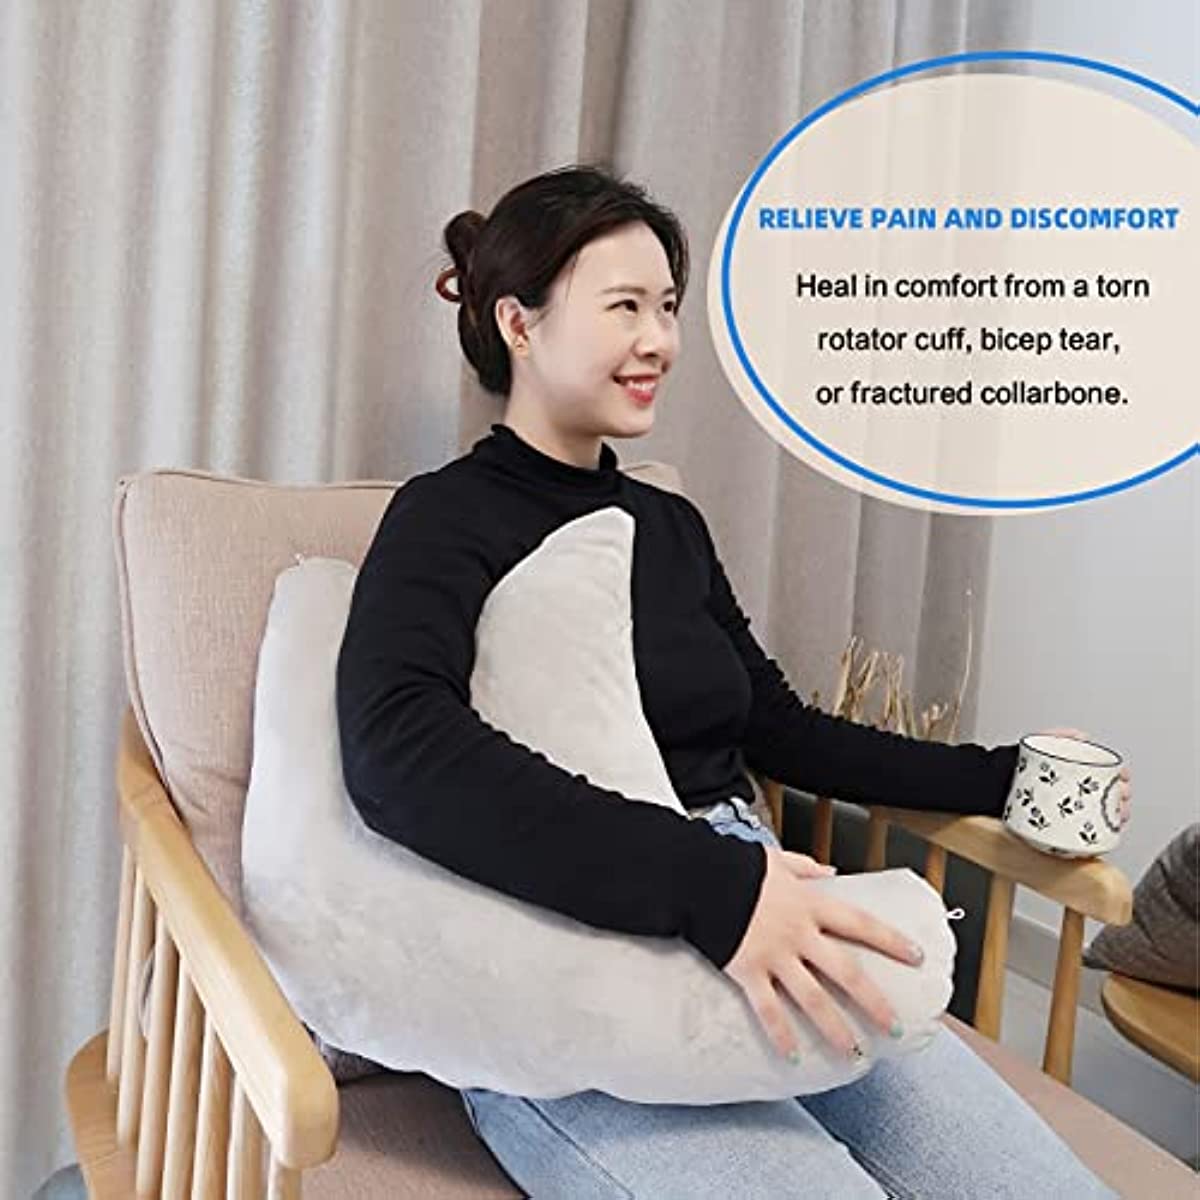 Shoulder Surgery Pillow, Ergonomic Rotator Cuff Pillow, Comfortable Post Shoulder Surgery Pillow, Adjustable Structure Provide Support, Shoulder Pain Relief, Firm and Removable (Grey)